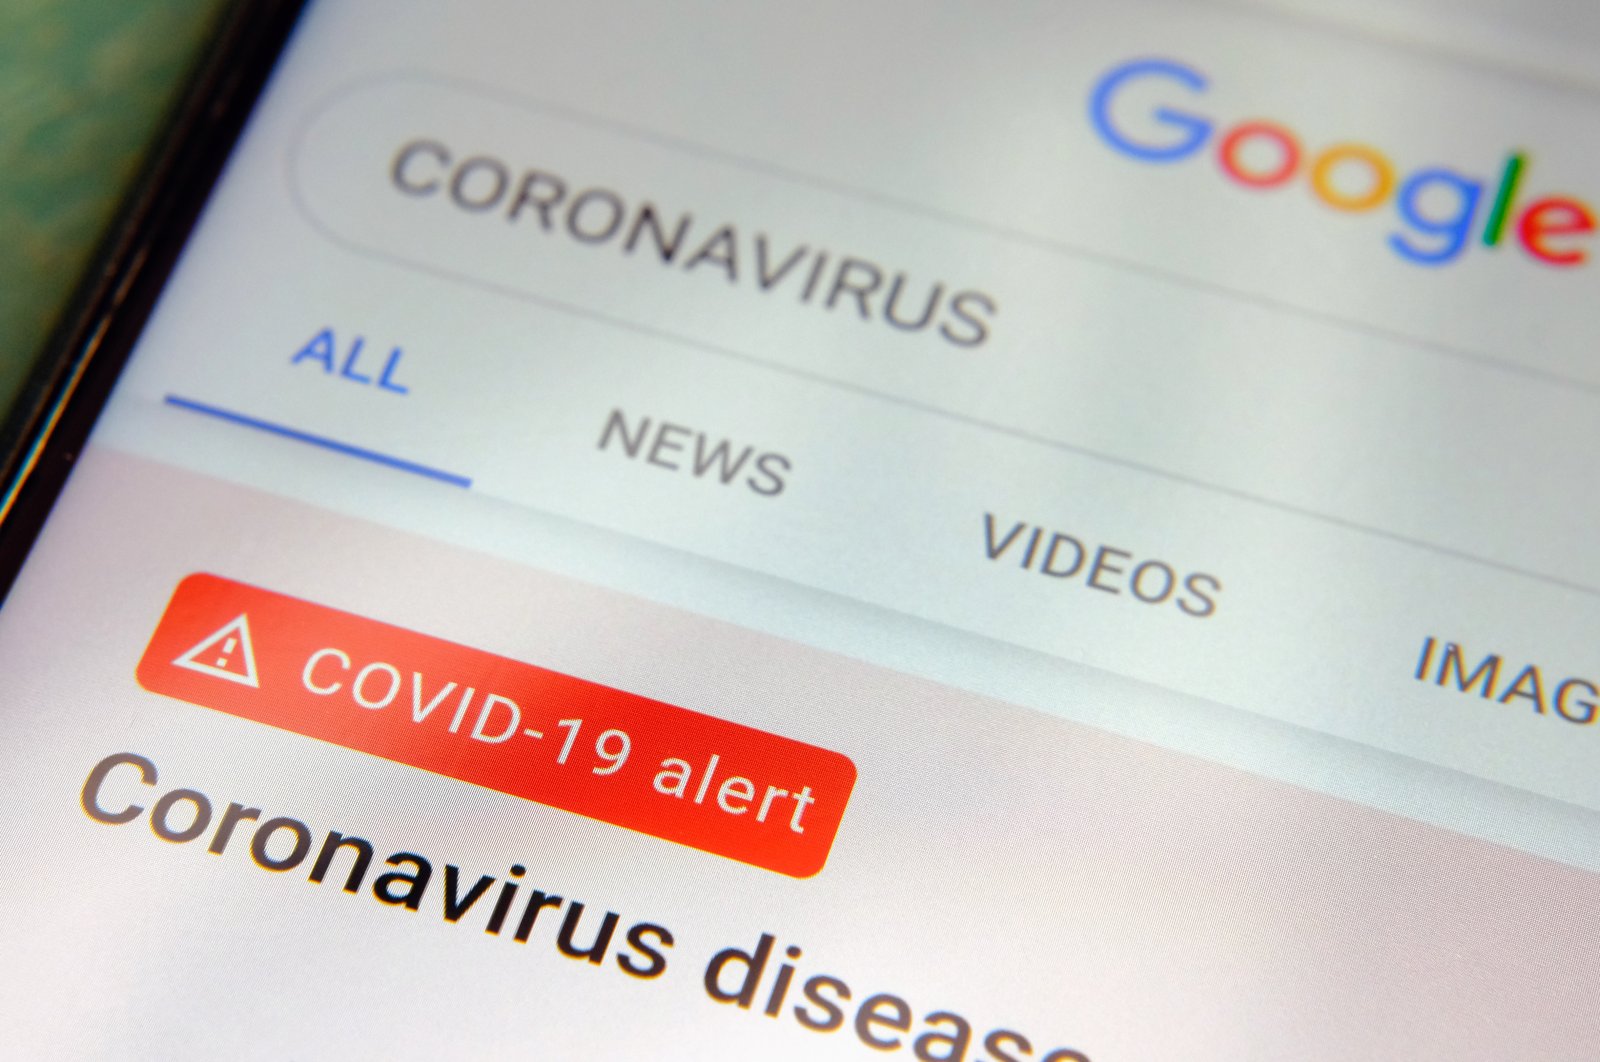 The word "coronavirus" in a Google search box on a smartphone screen, in Stone, England, April 4, 2020. (Shutterstock Photo)